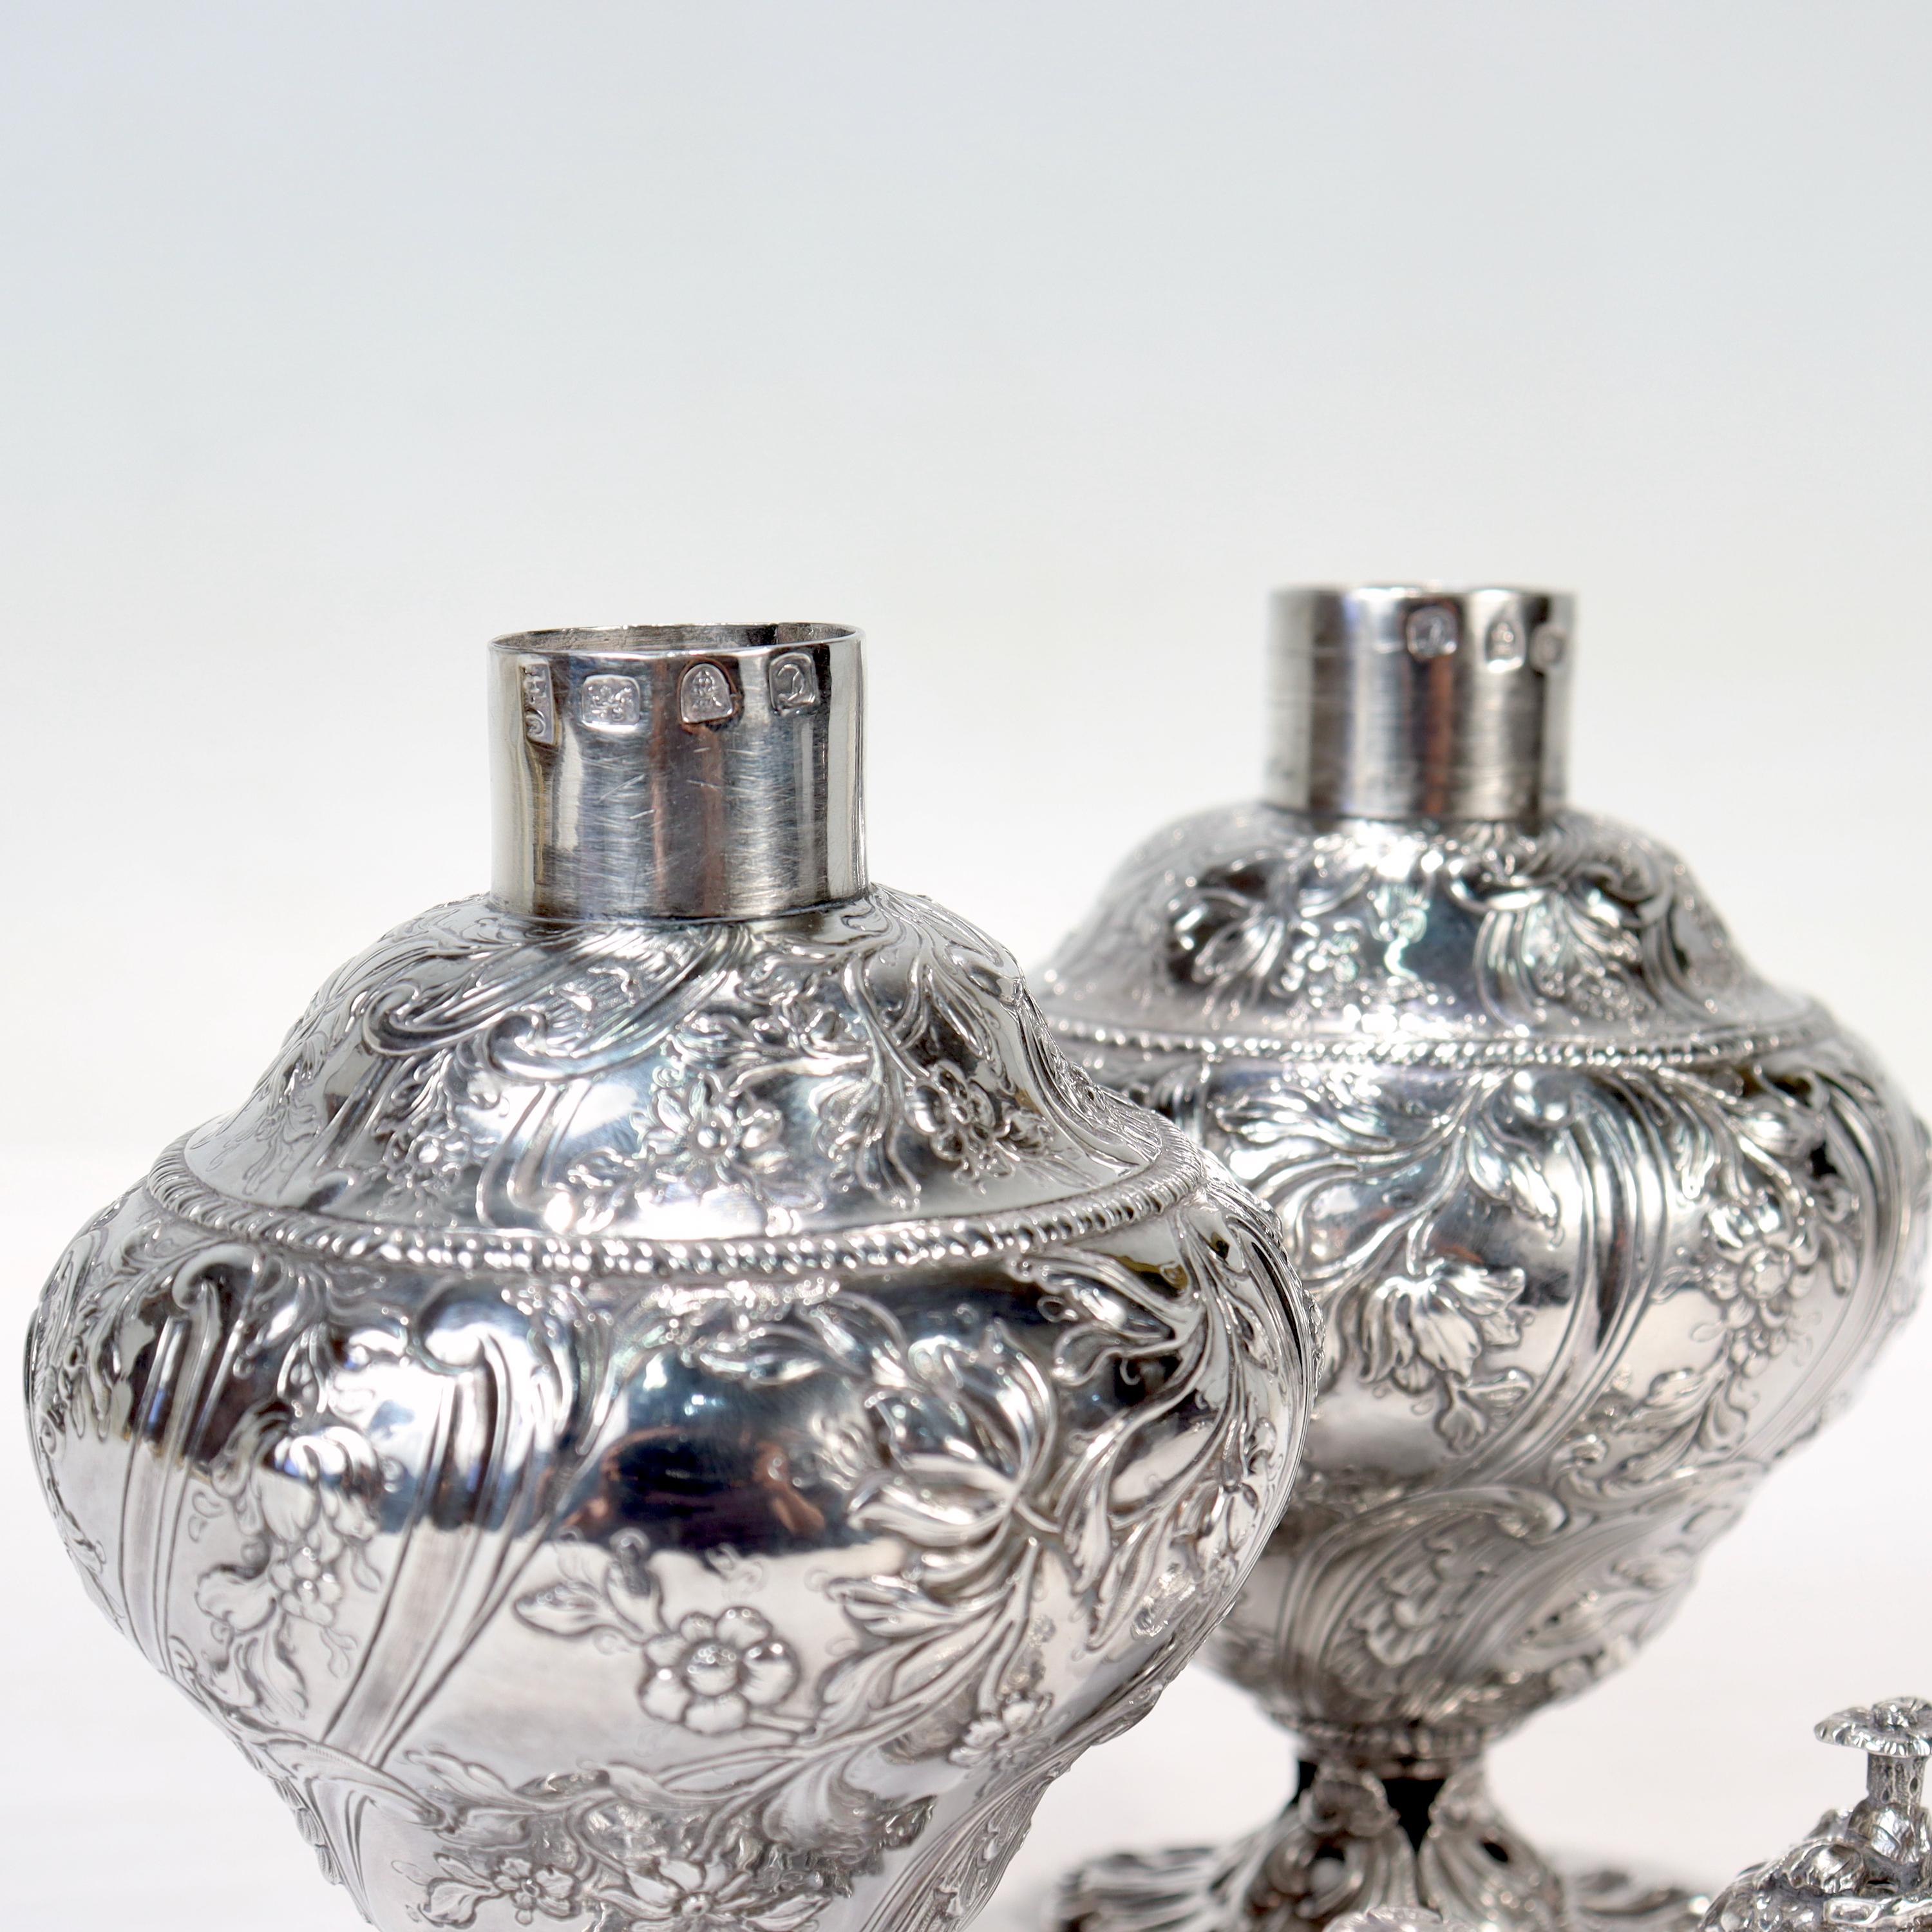 Pair of Antique Georgian English Sterling Silver Tea Caddies by Francis Crump For Sale 8